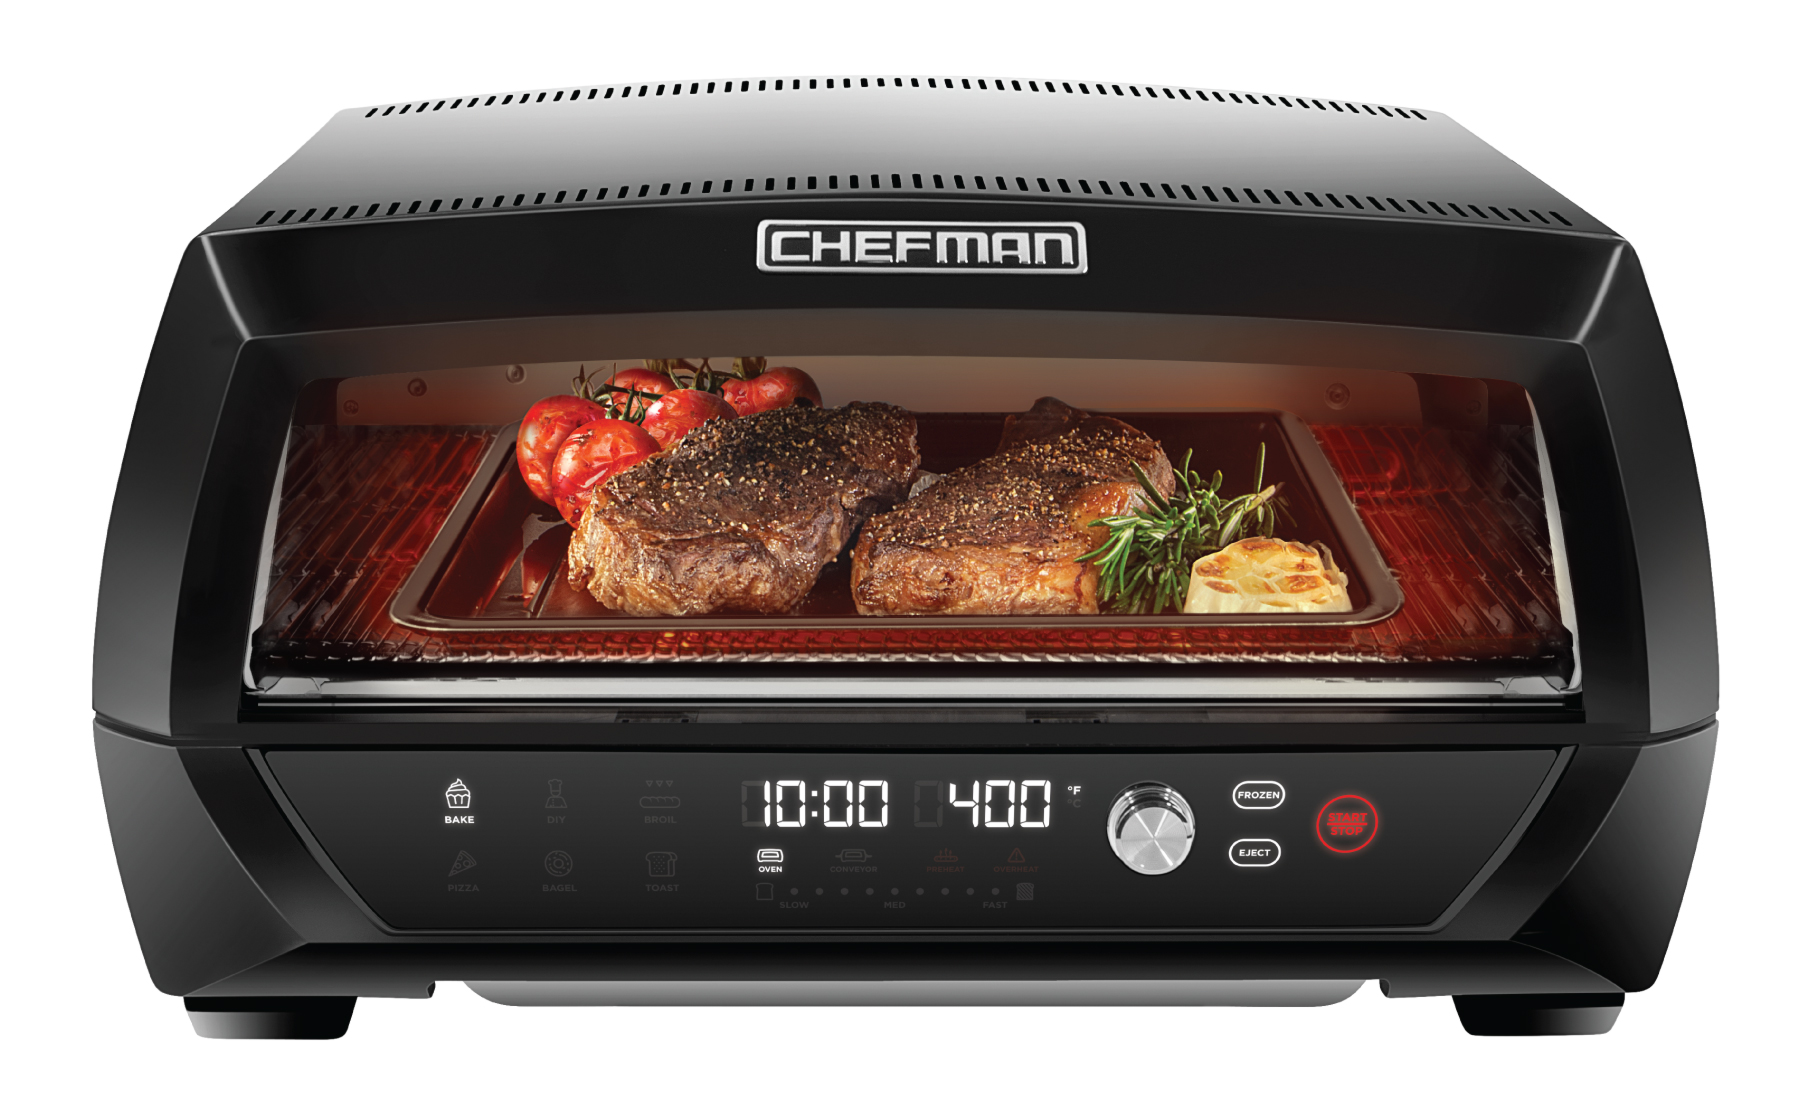 Chefman Food Mover Conveyor Toaster Oven, Stainless Steel - image 1 of 7